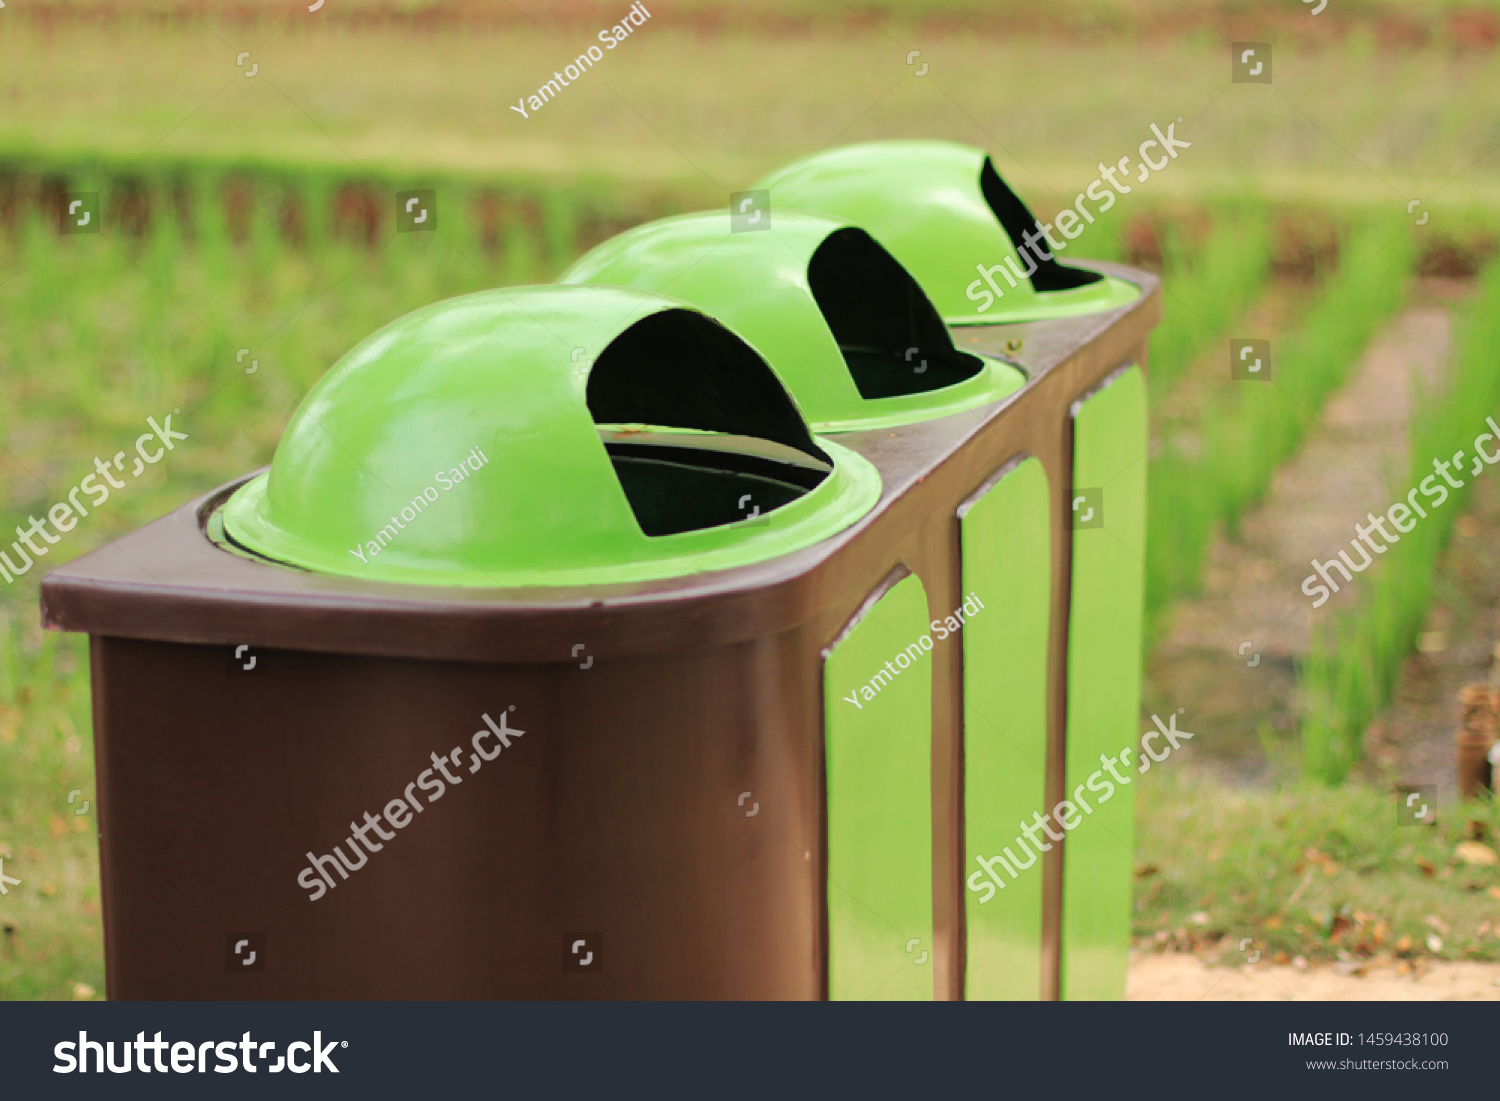 Trash can that separates organic types and other types #1459438100